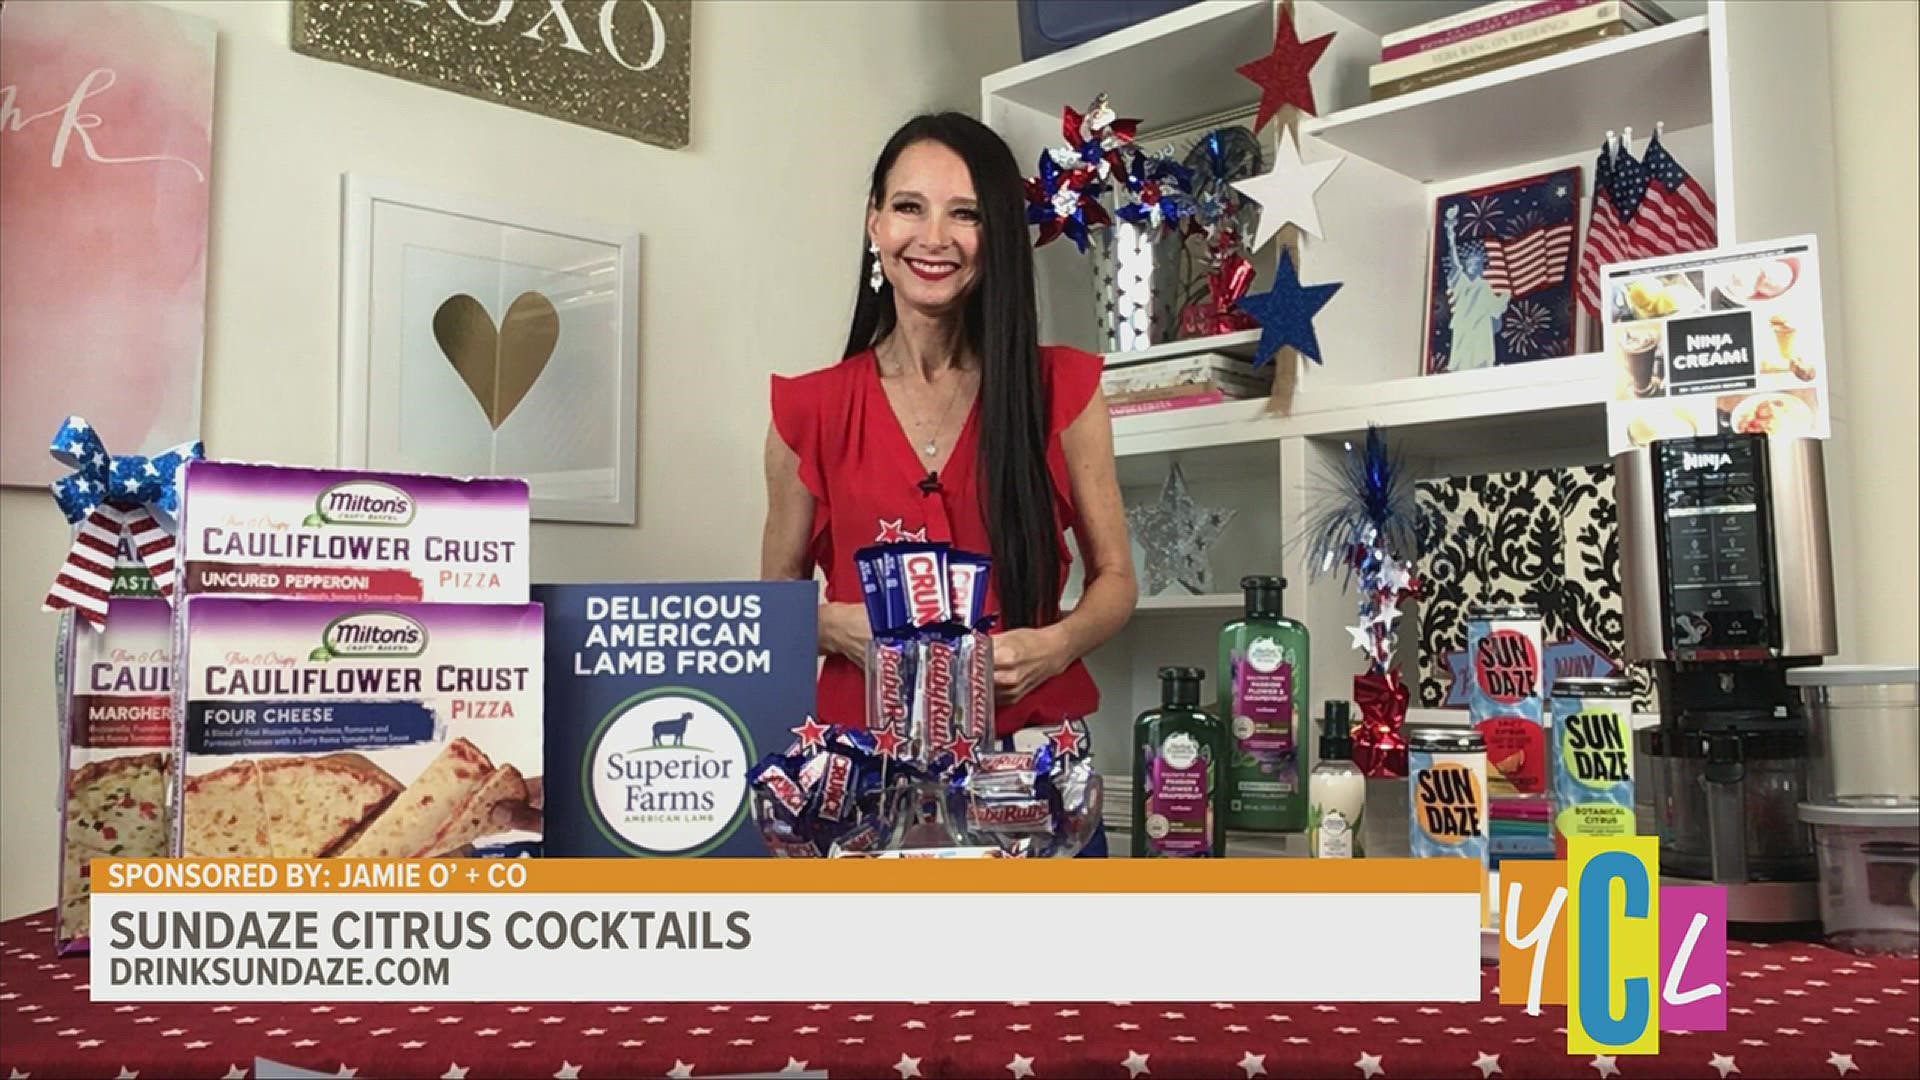 Let's get ready for the 4th of July with treats, drinks and more! This segment paid for by Jamie O’ + Co.